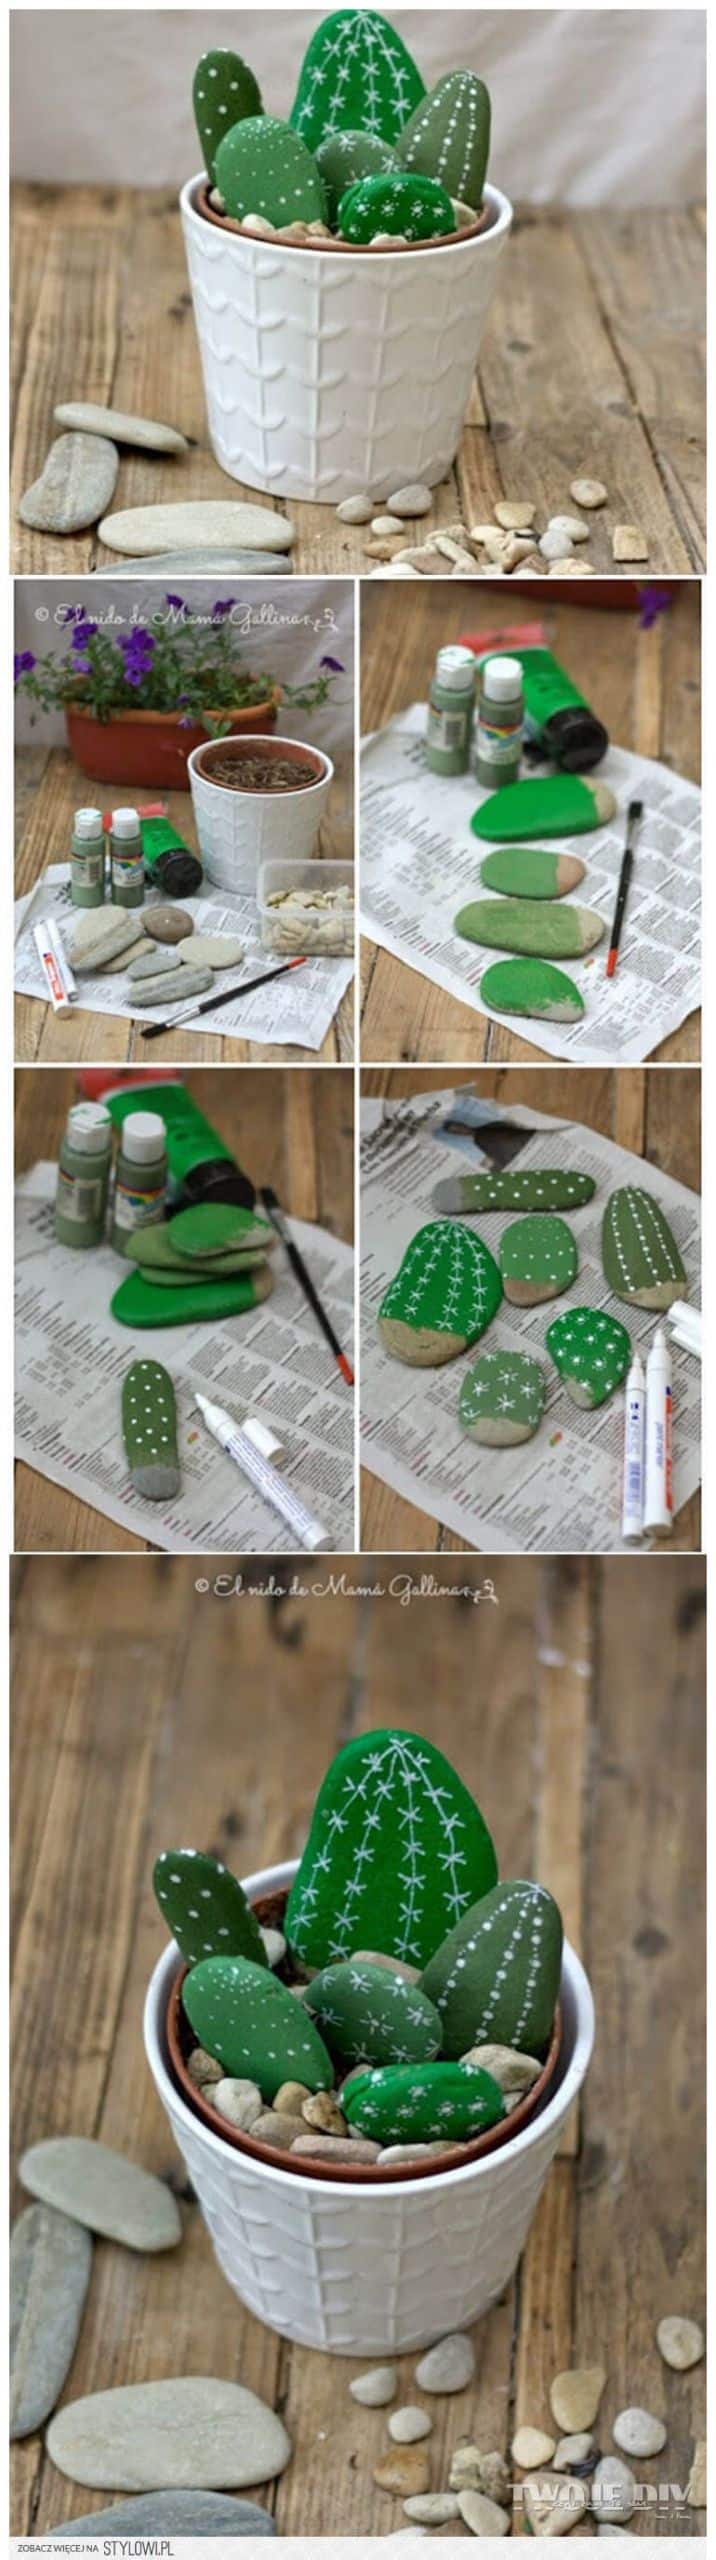 decorative ideas with pebbles 3 scaled